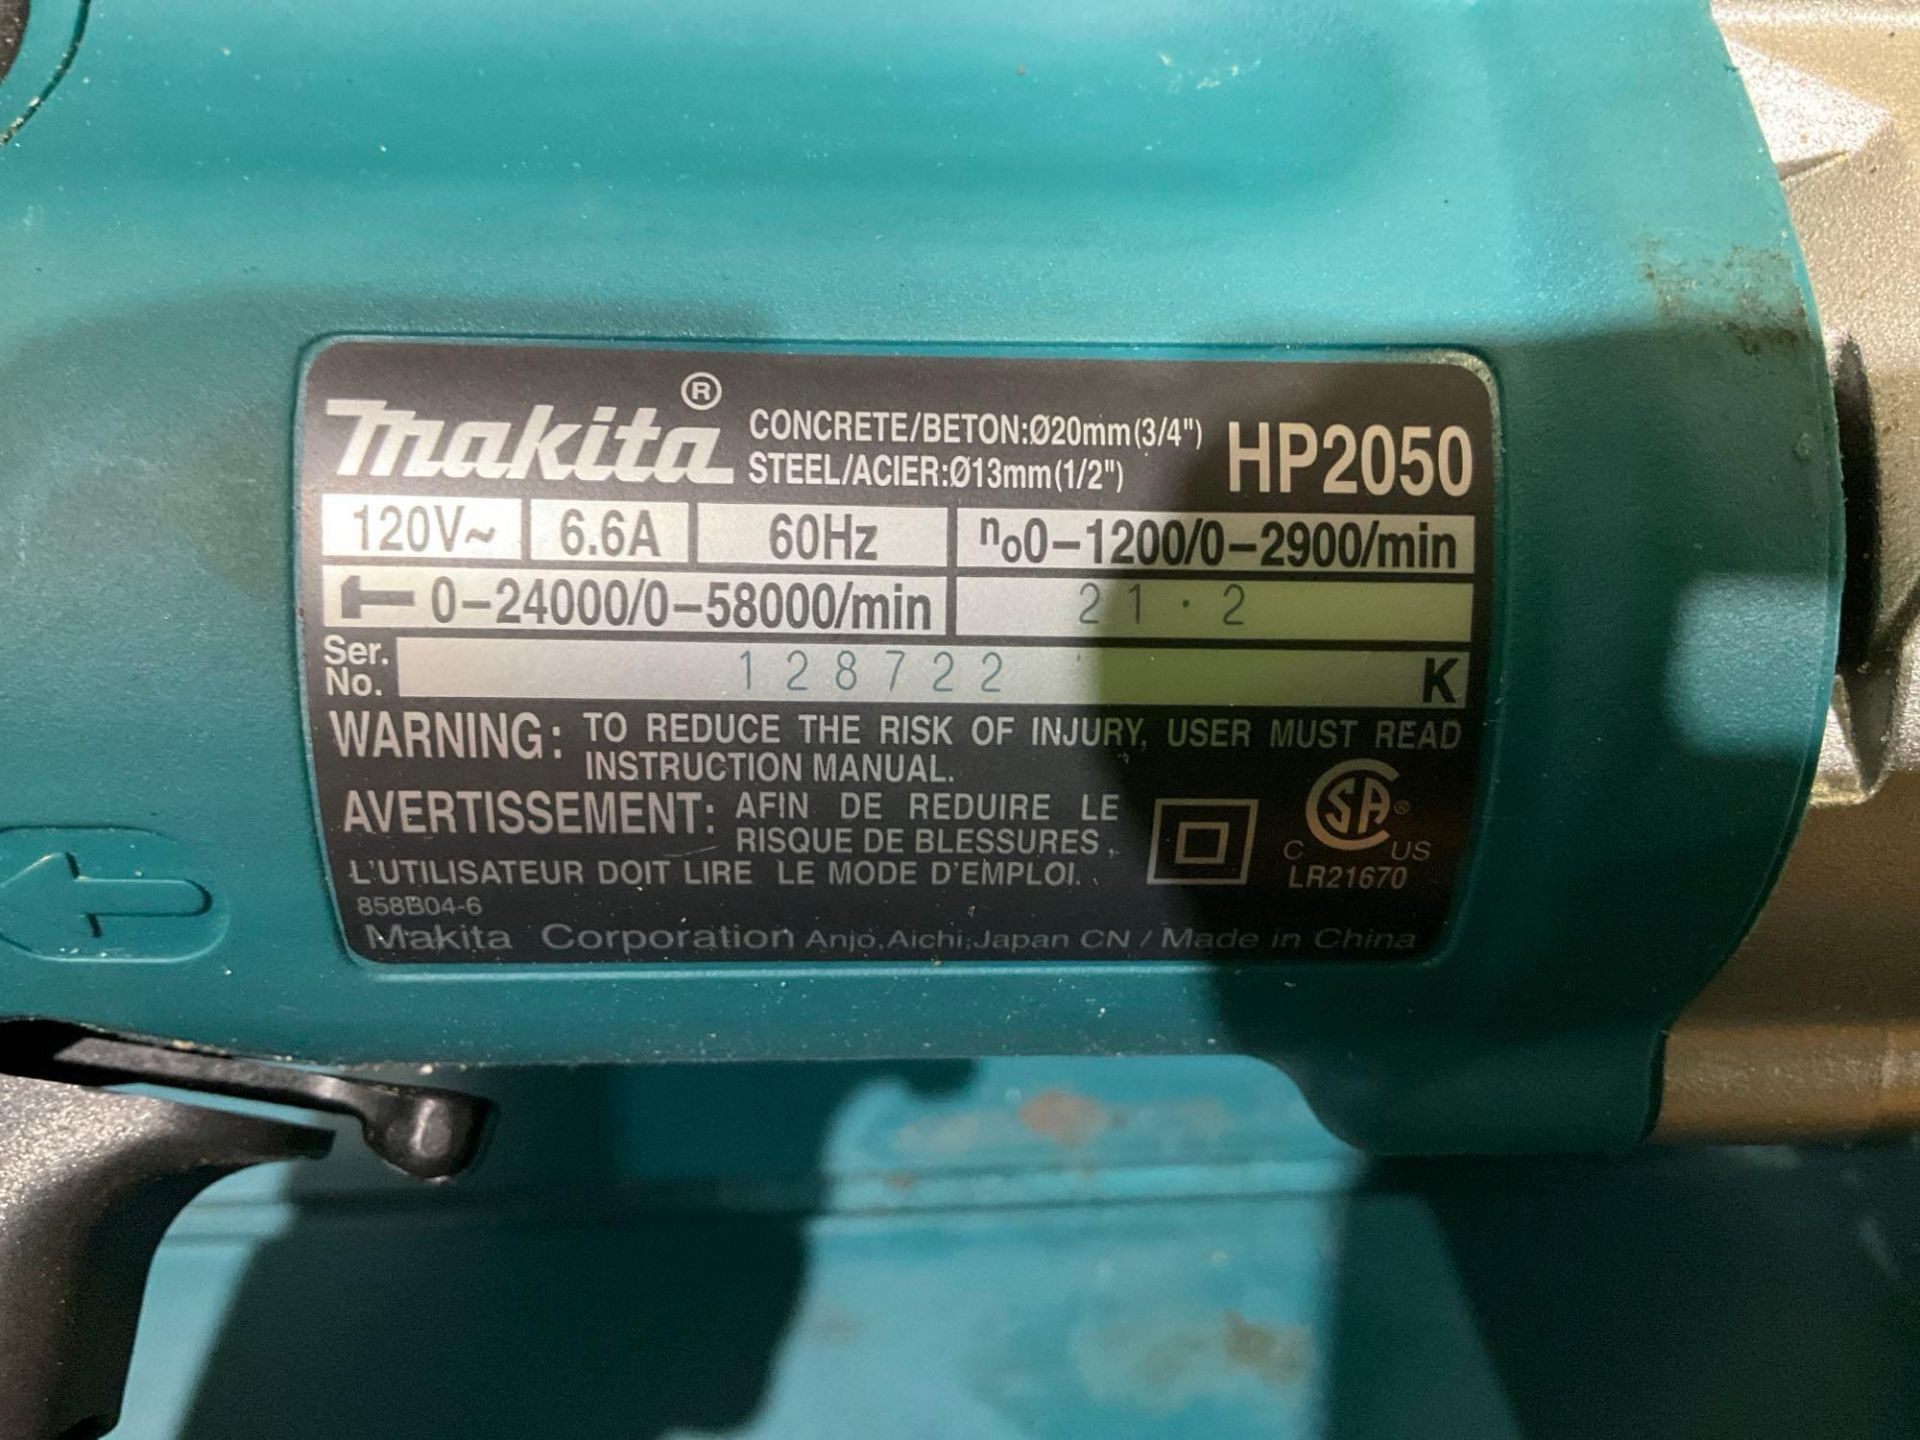 MAKITA 2 SPEED HAMMER DRILL MODEL HP2050 WITH CARRYING CASE , 120VOLTS, 6.6A, RECONDITIONED - Bild 3 aus 6